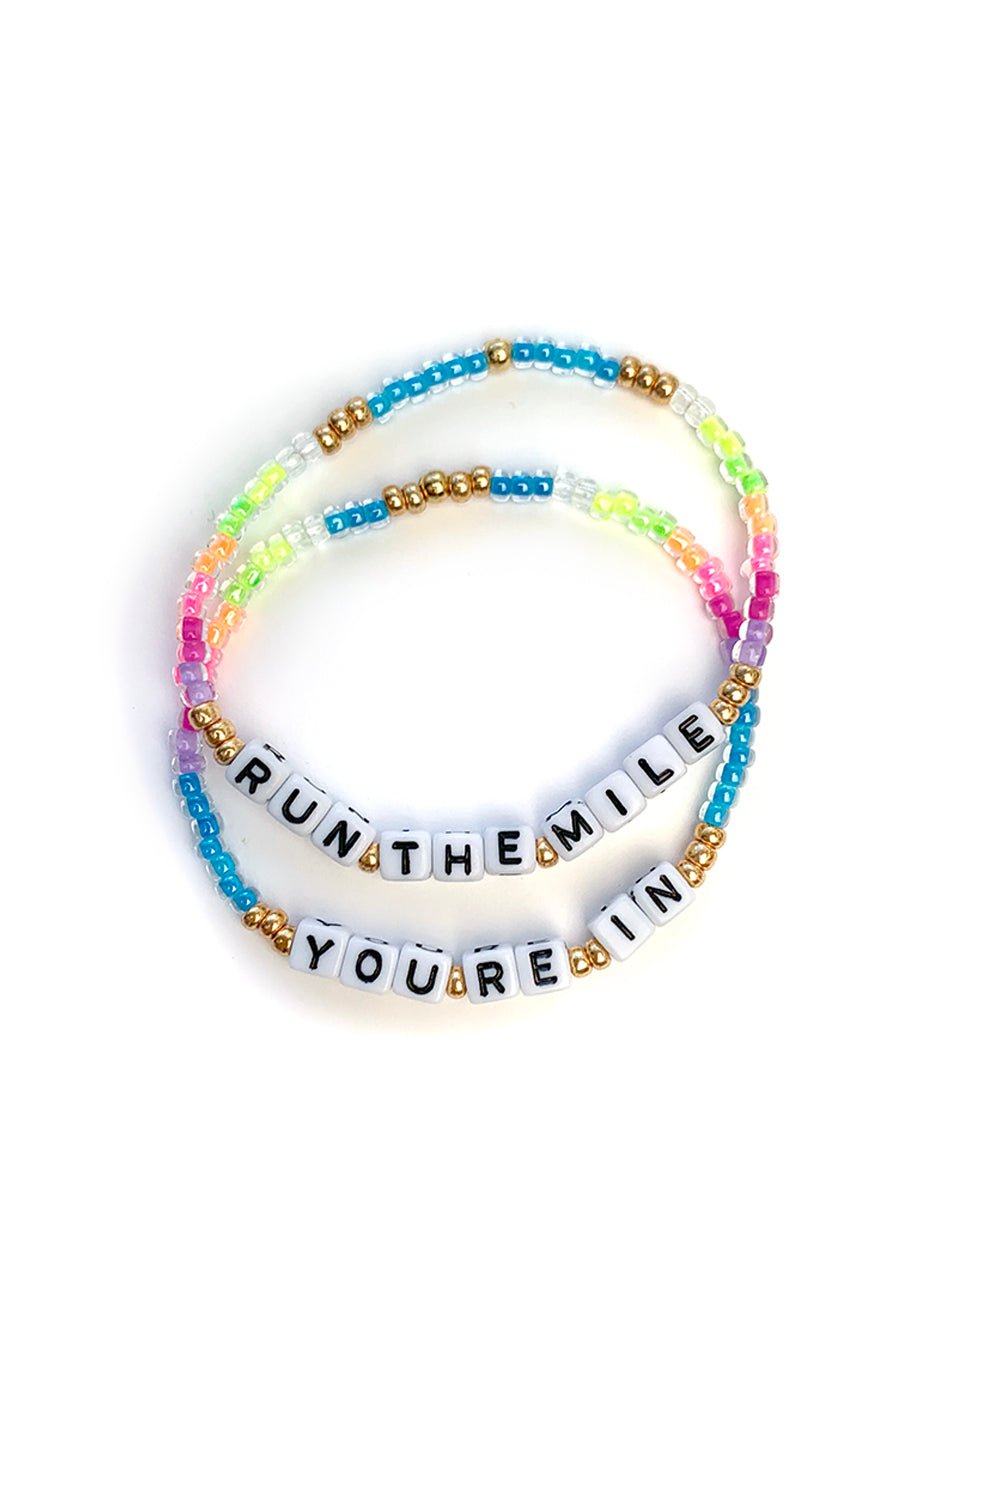 Run The Mile You're In Bracelet – Sarah Marie Running Co.